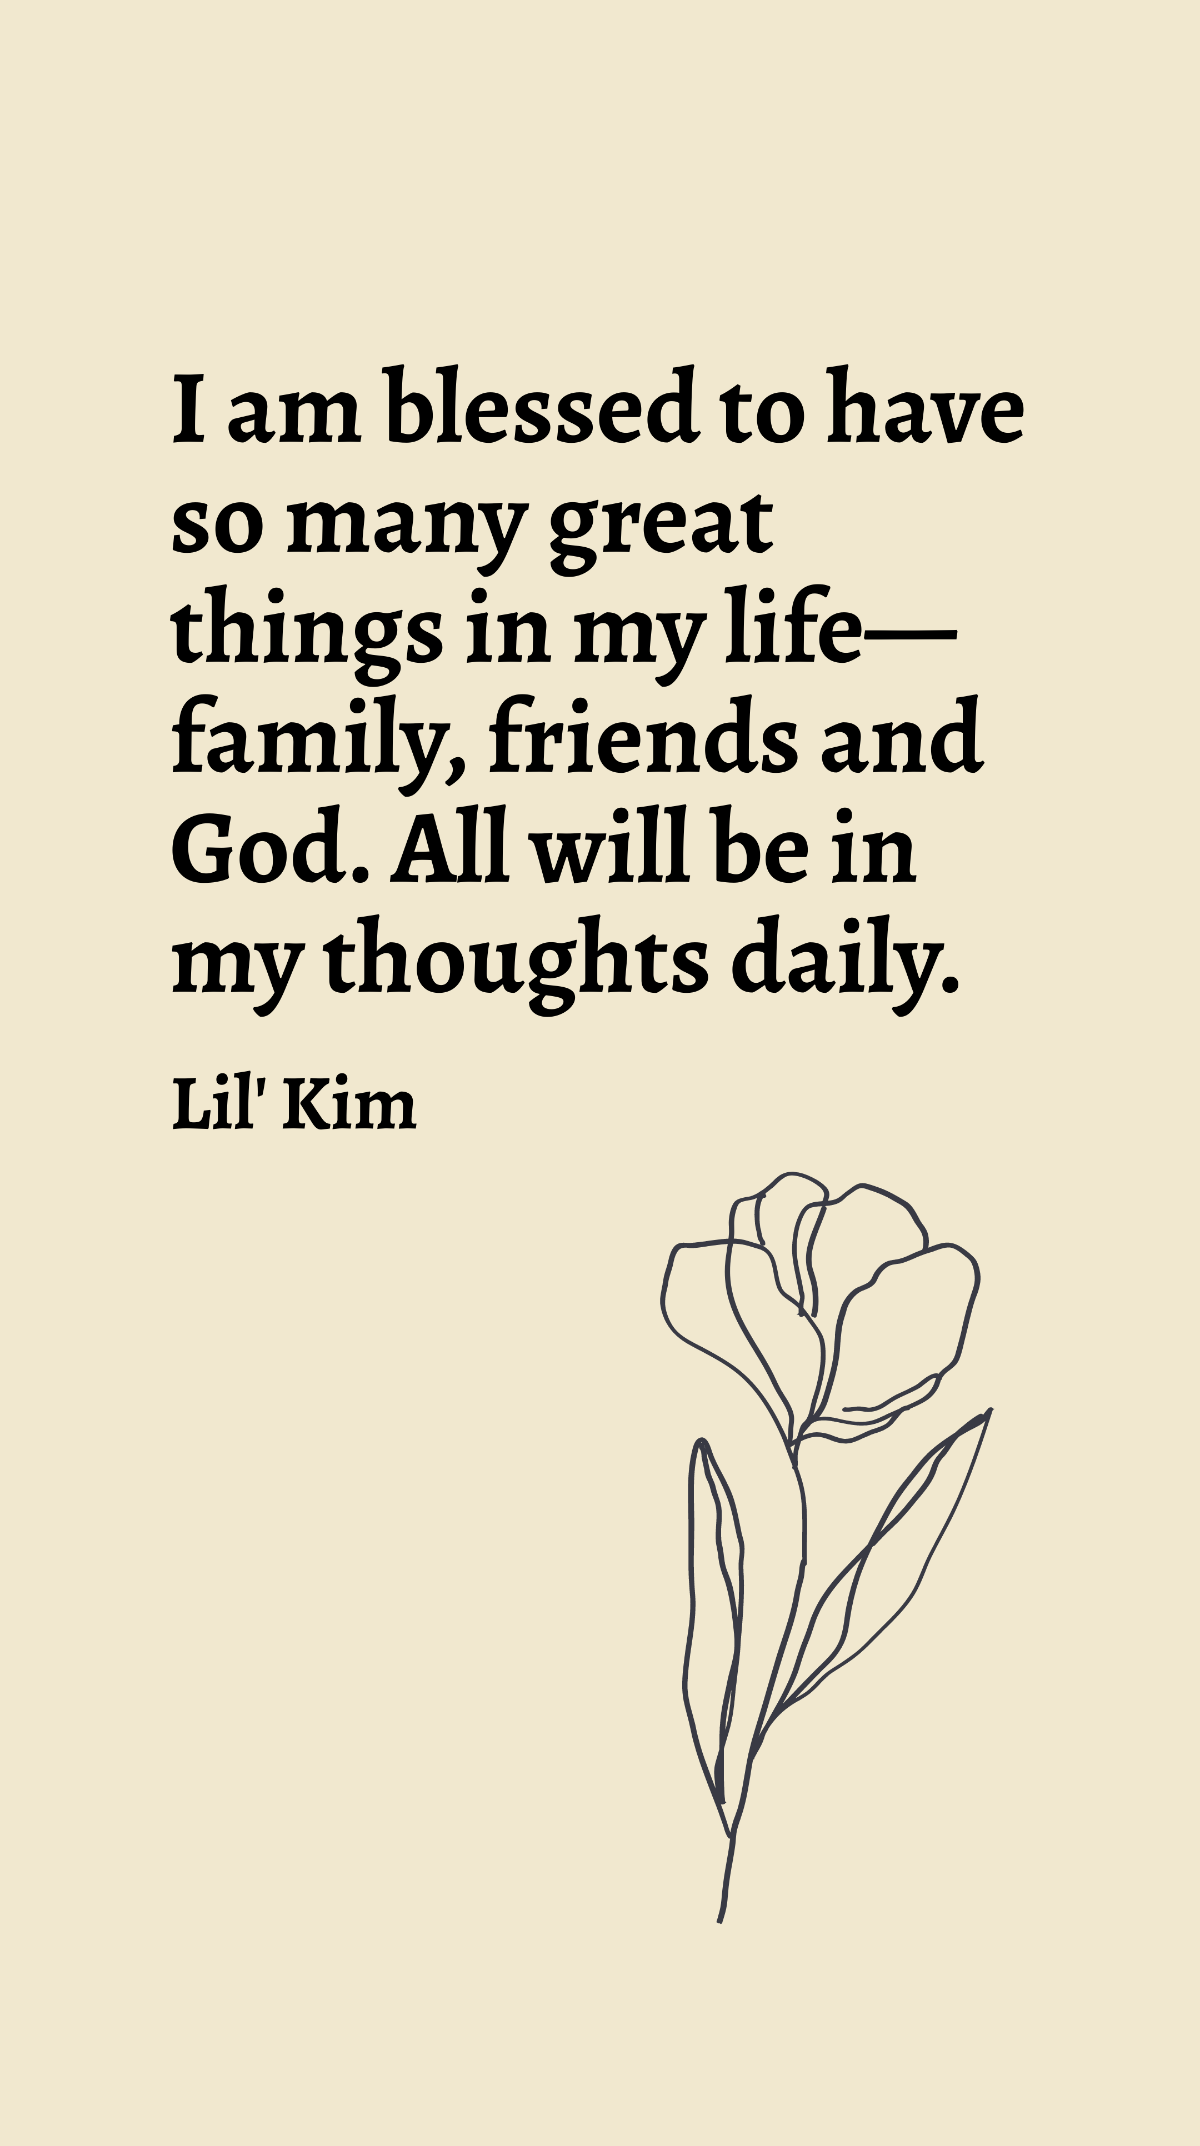 Free Lil' Kim - I am blessed to have so many great things in my life - family, friends and God. All will be in my thoughts daily. Template